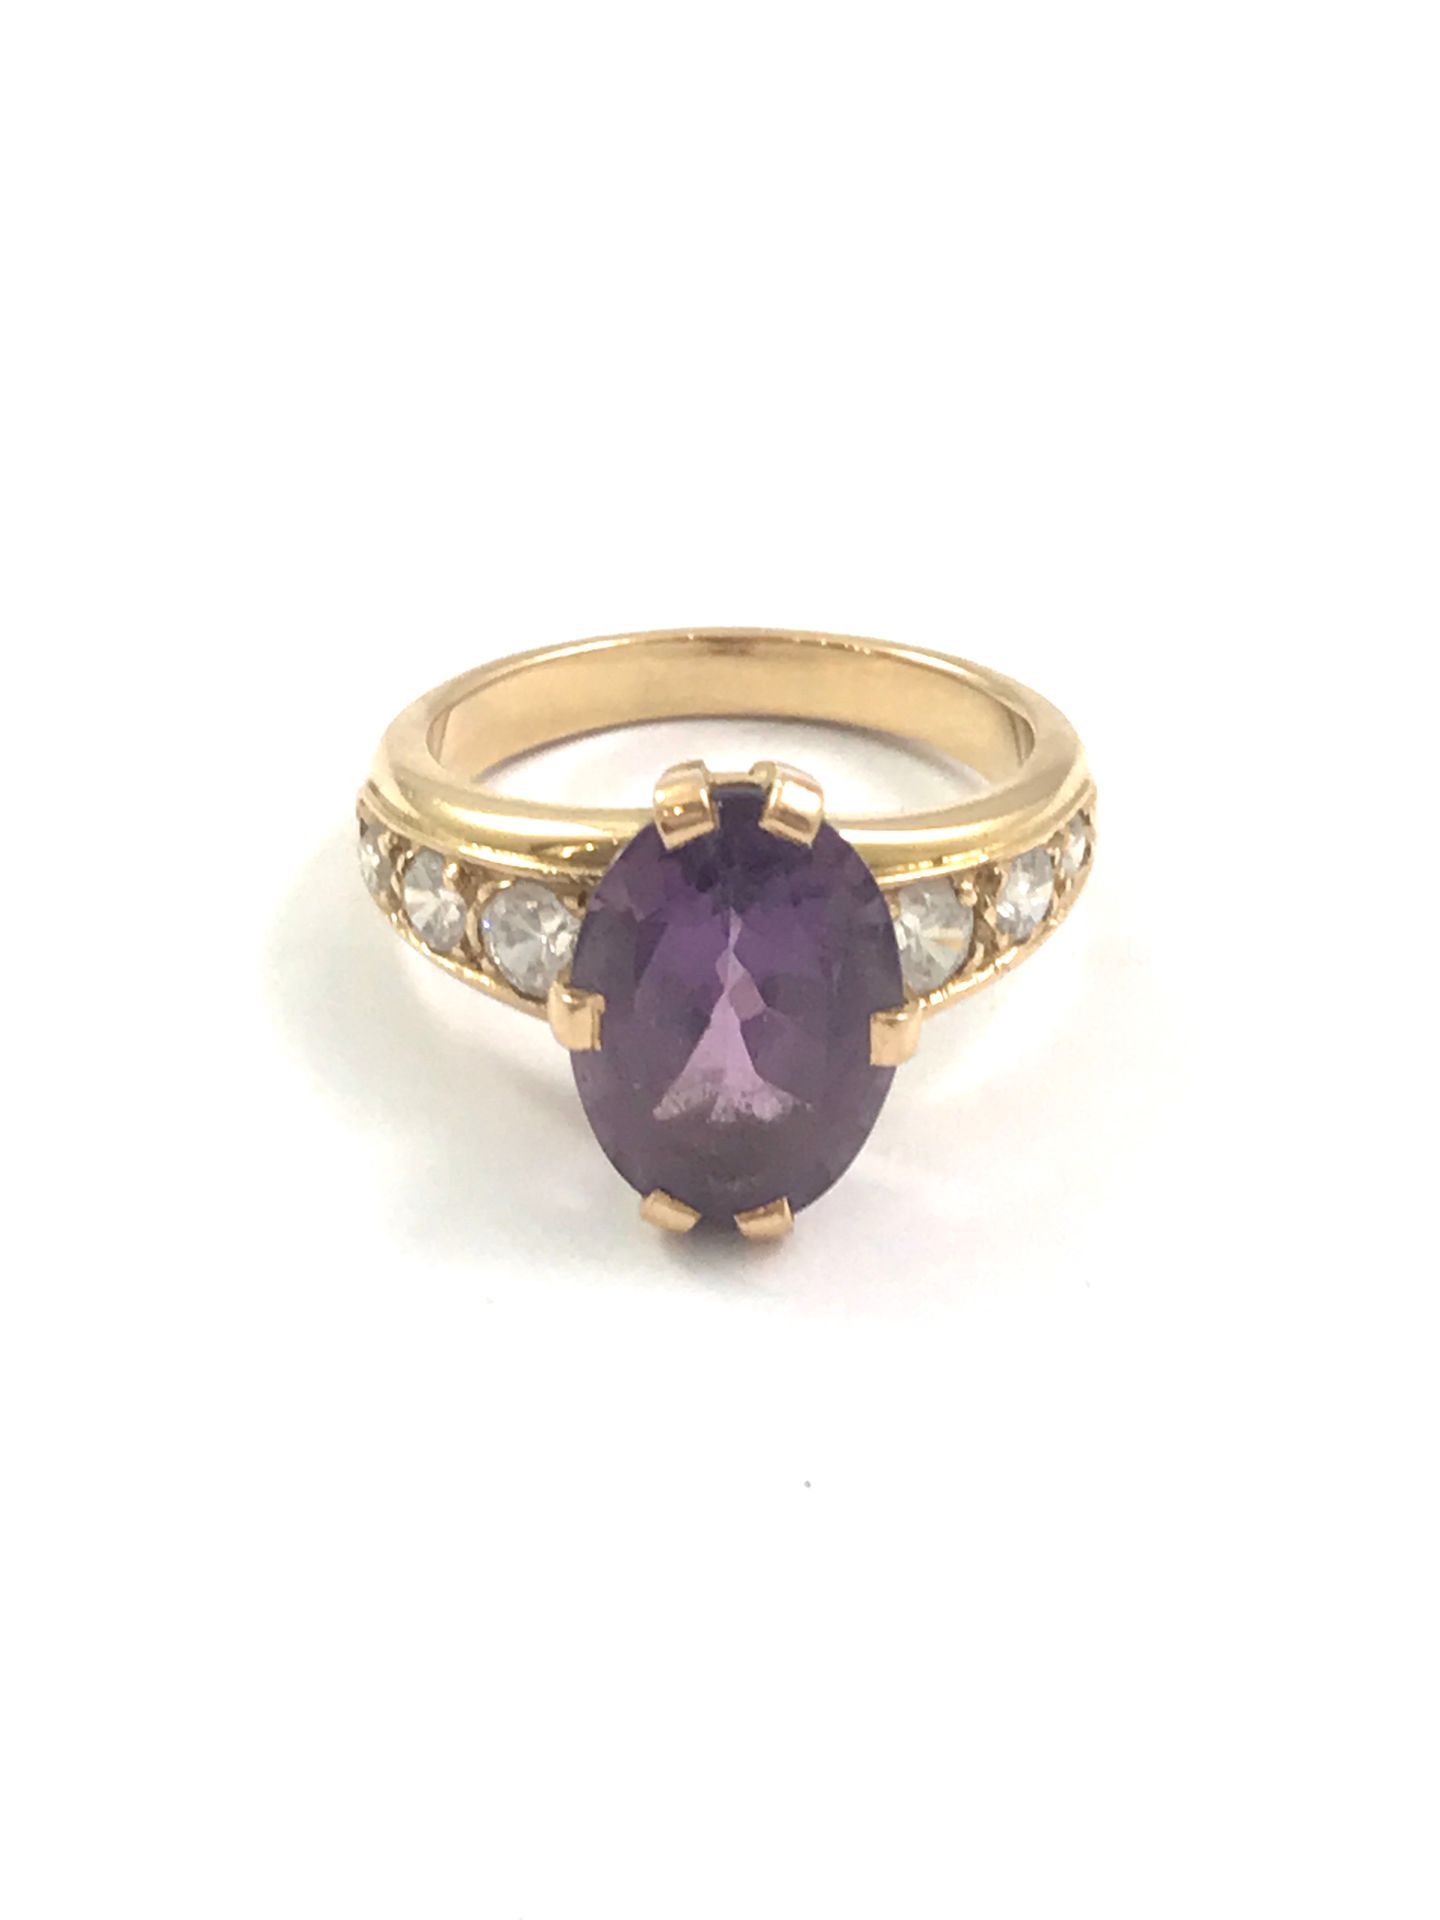 Null Ring in 18K yellow gold 750°/00, centered on an oval amethyst with white st&hellip;